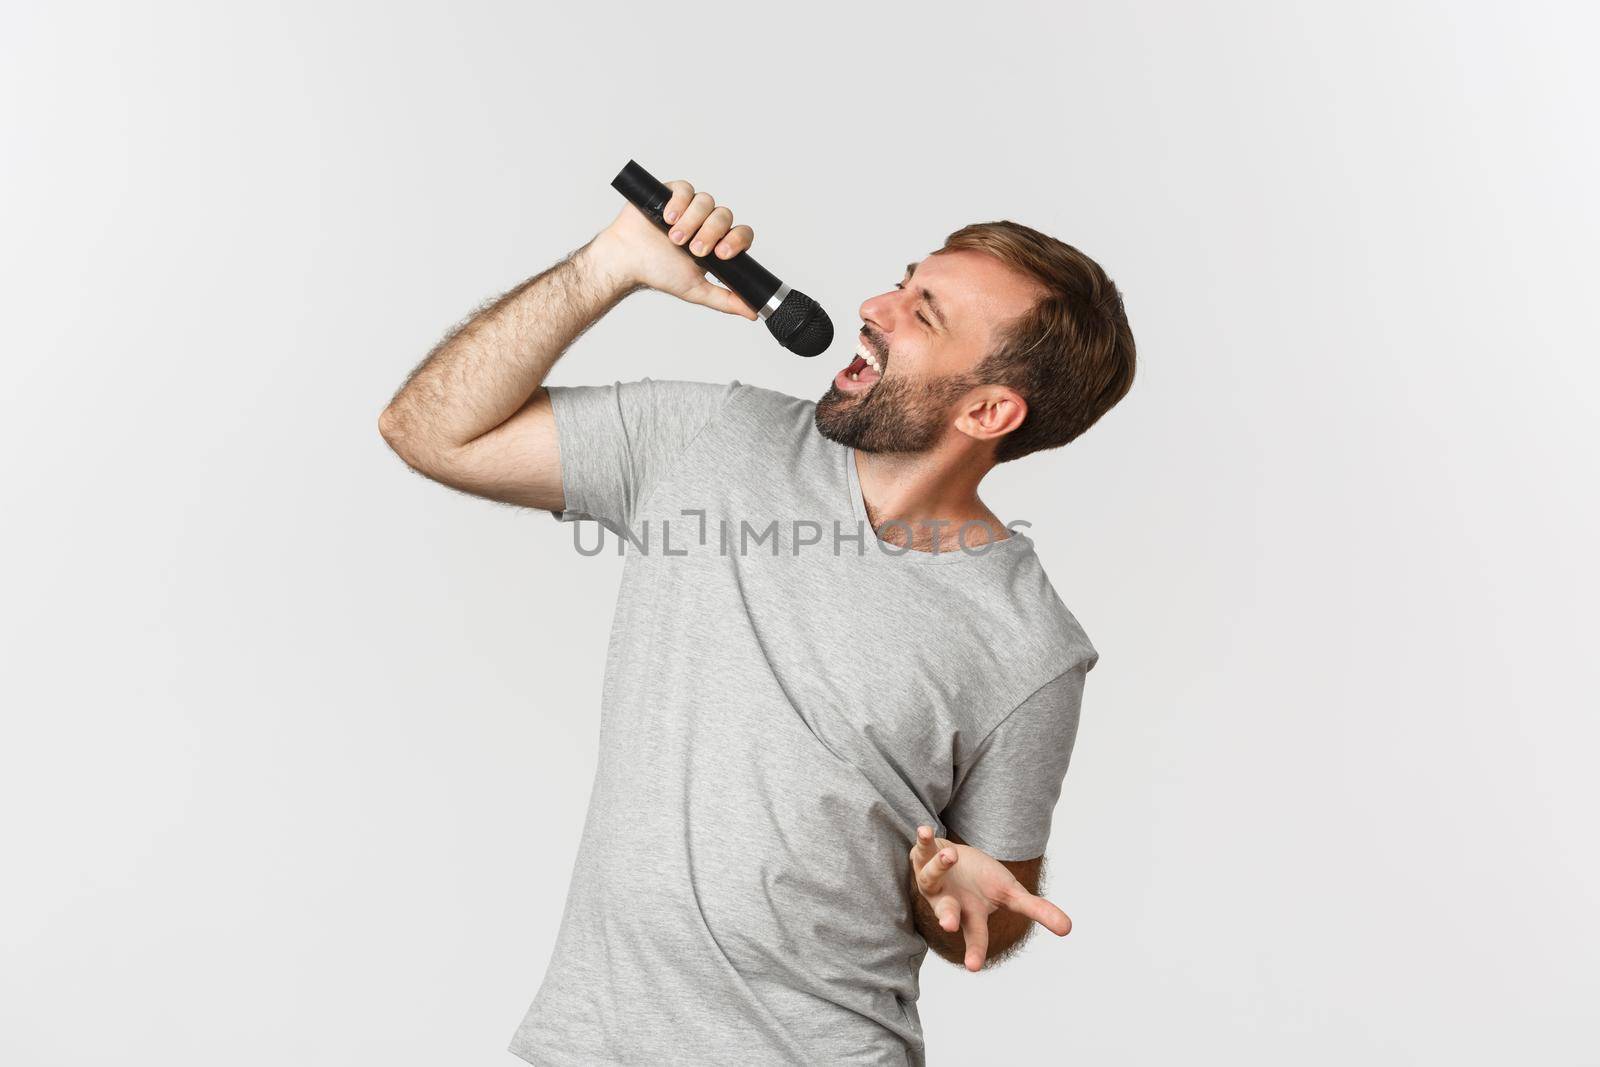 Handsome carefree guy singing song in karaoke, holding microphone, standing over white background.